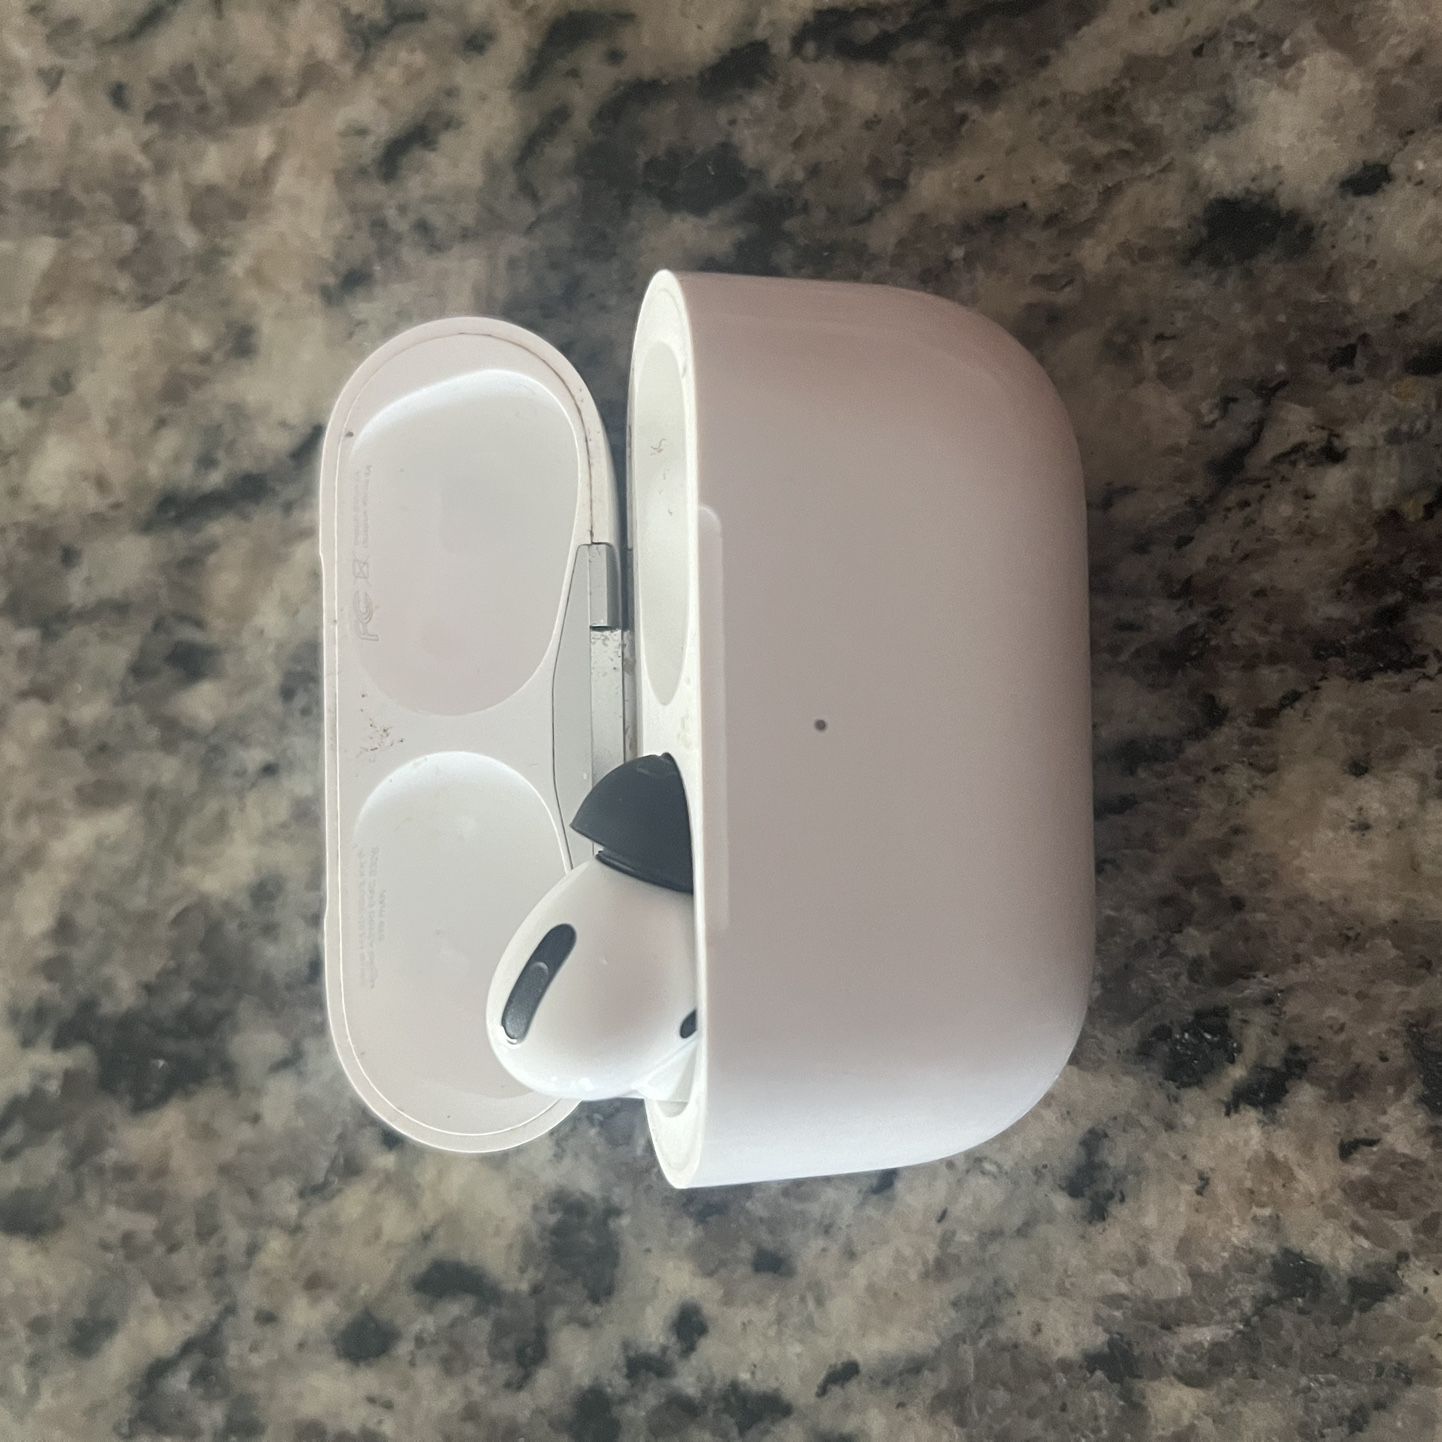 Airpod Pros ( left side only )